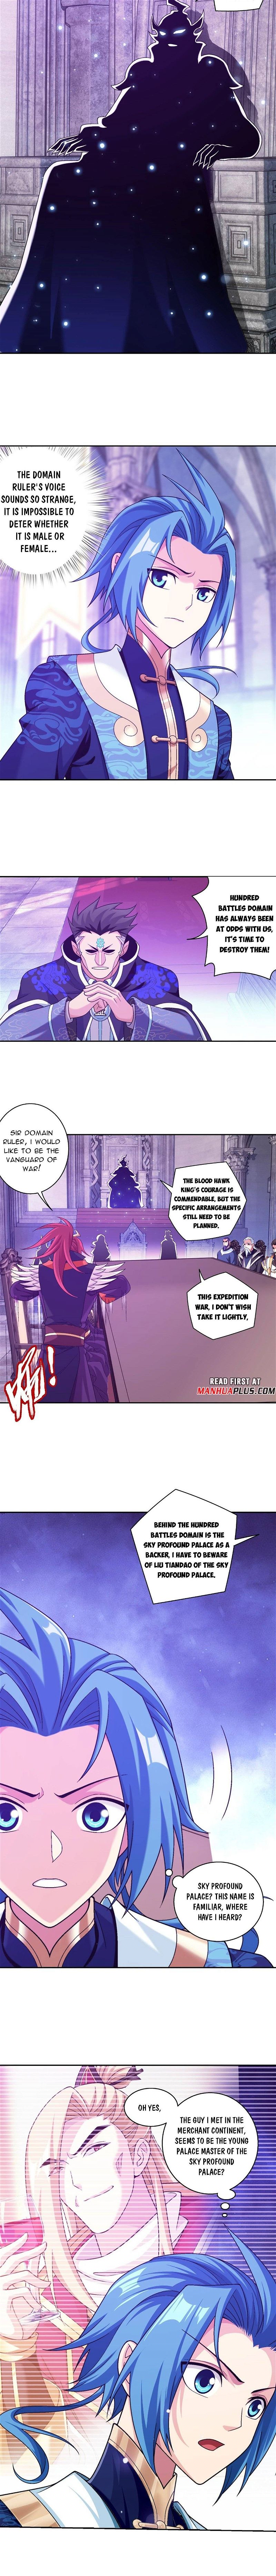 The Great Ruler Chapter 403 page 8